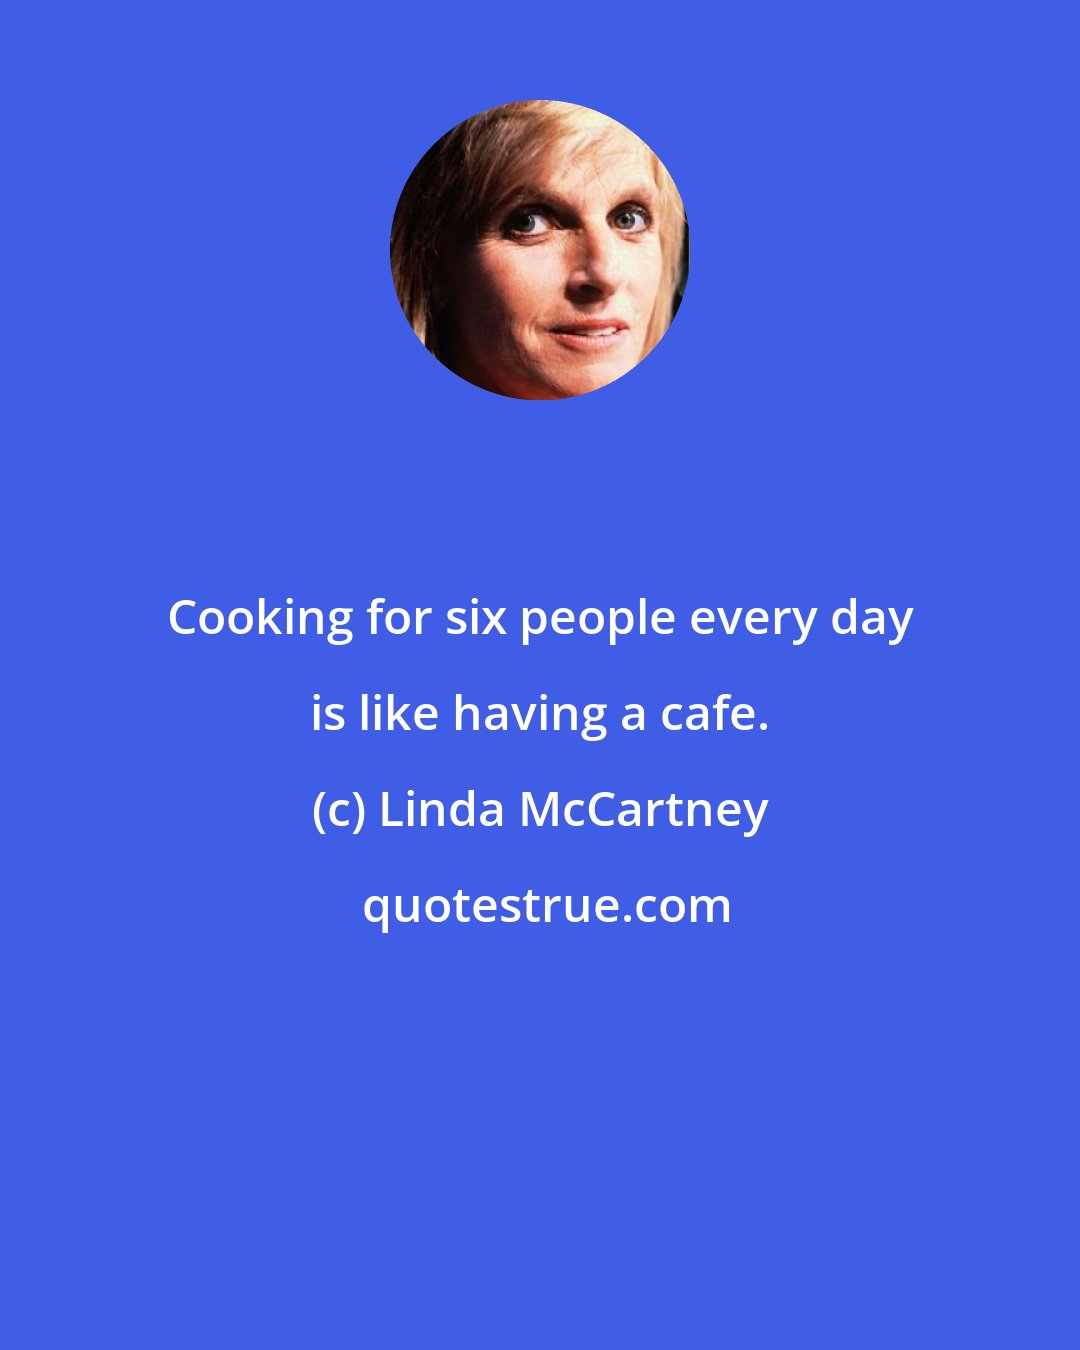 Linda McCartney: Cooking for six people every day is like having a cafe.